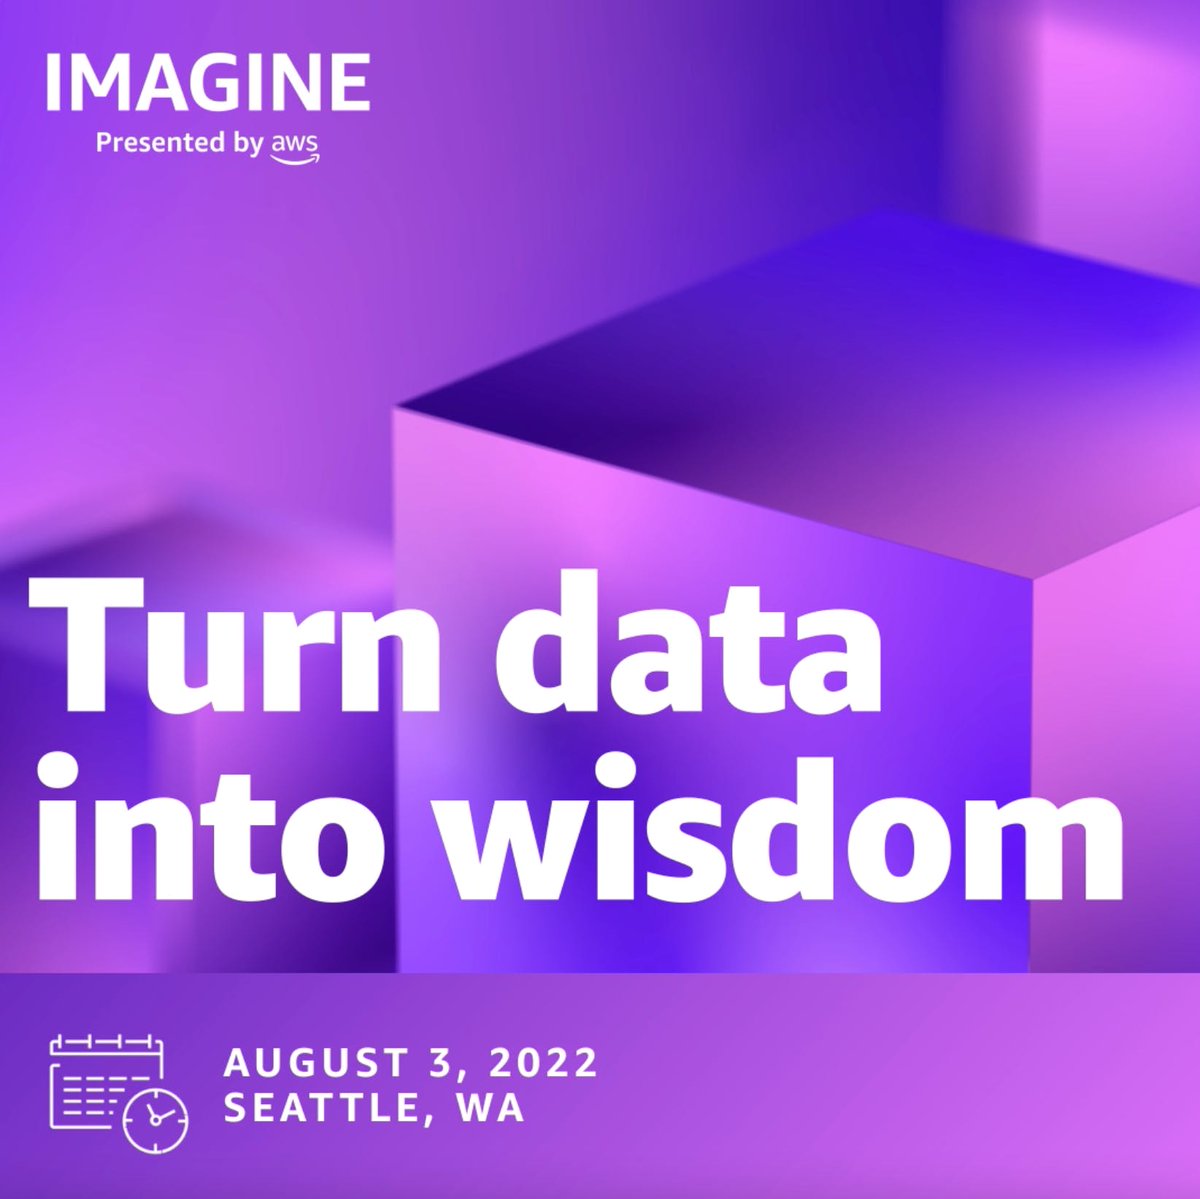 📊 Learn how to harness the power of your data to better serve your community at #AWSImagine. aws.amazon.com/government-edu… go.aws/3nUorjW